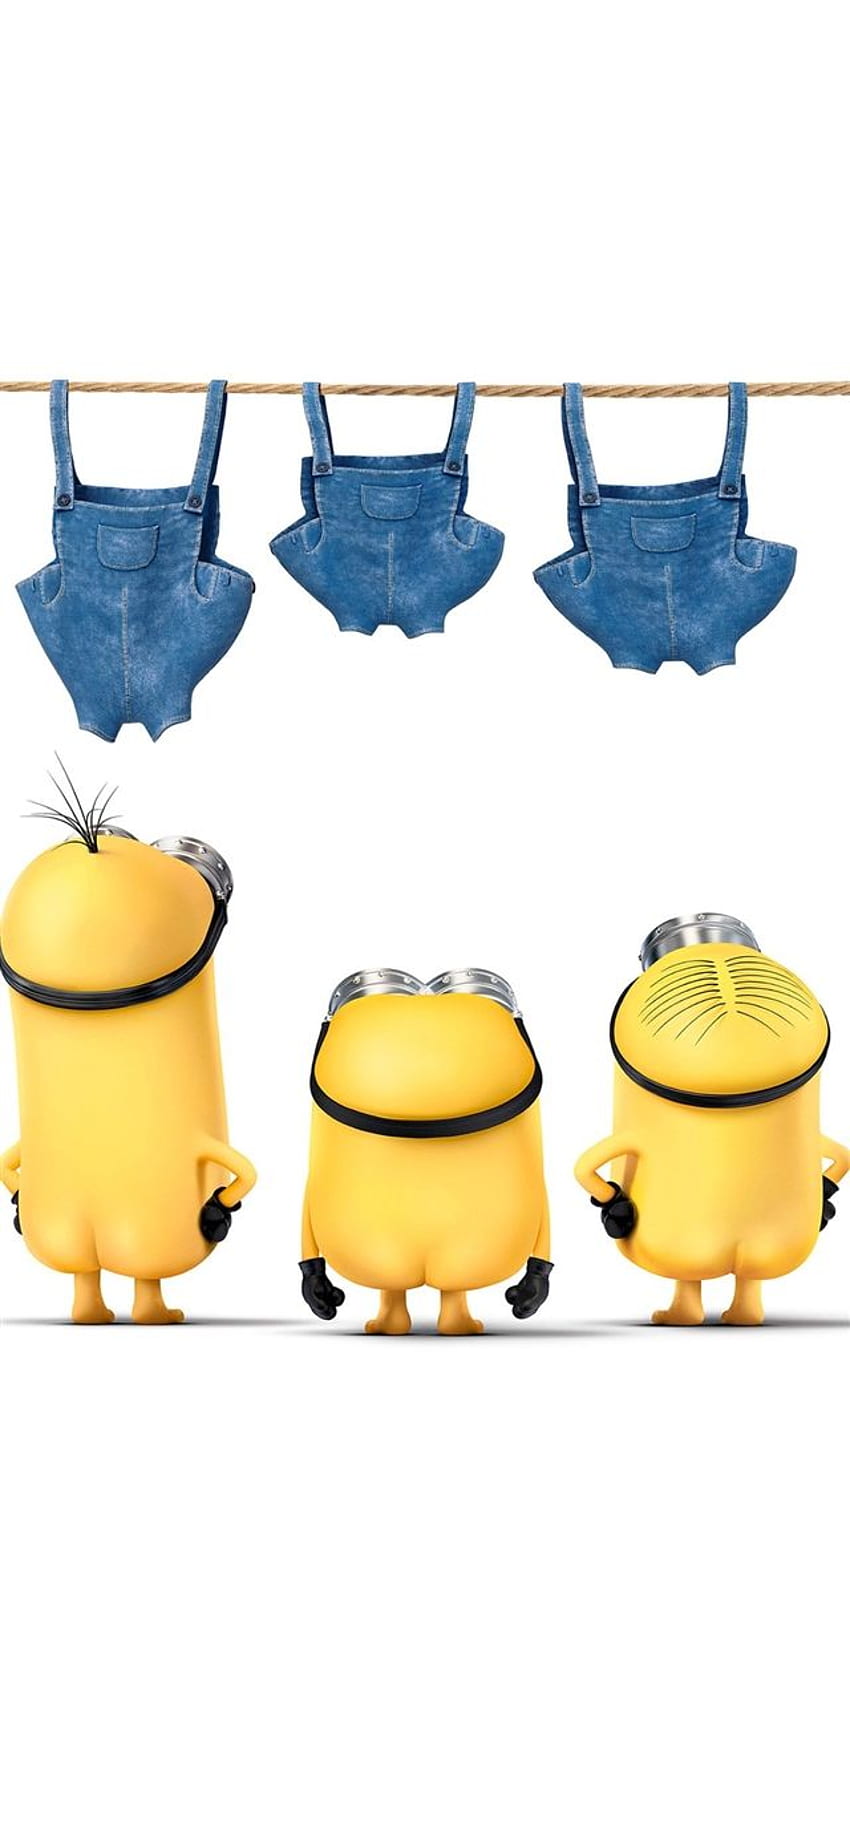 Minions despicable nude me cute yellow art illustration iPhone X, Cute for HD тапет за телефон